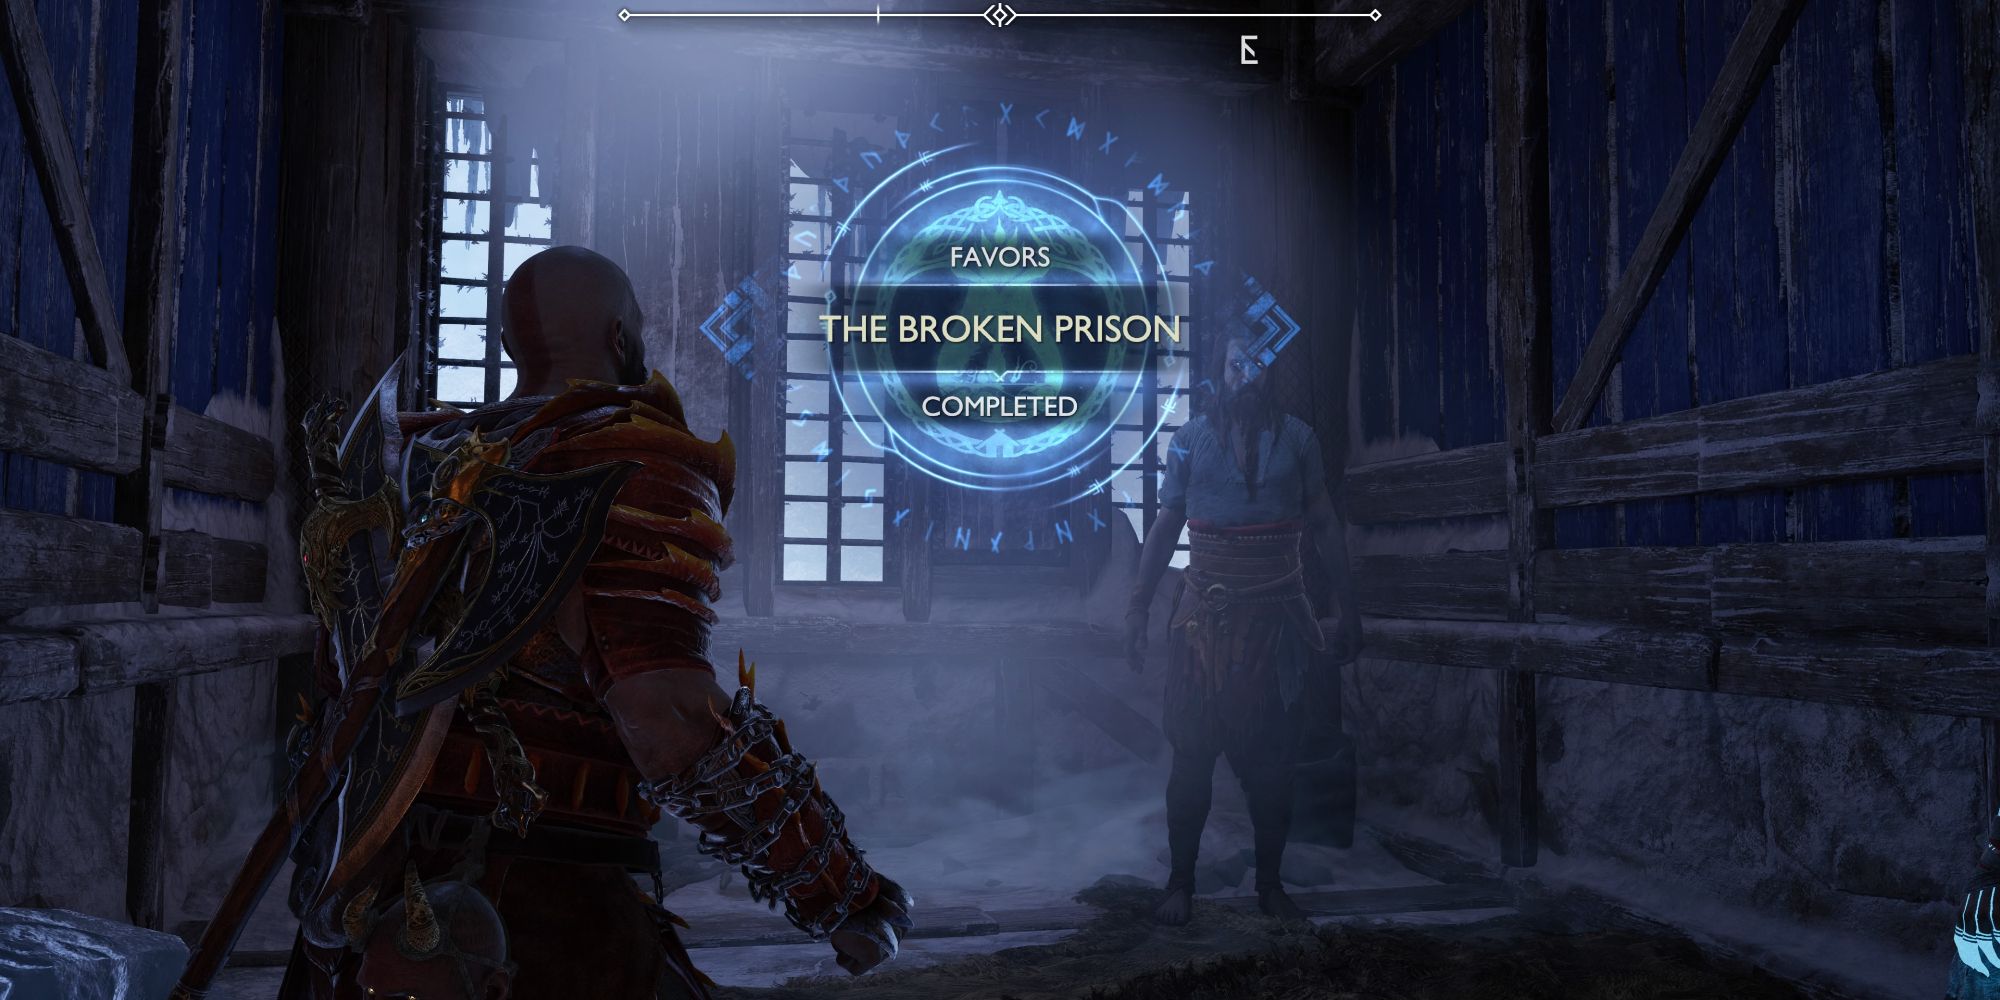 Image showing Kratos near Tyr in a prison.